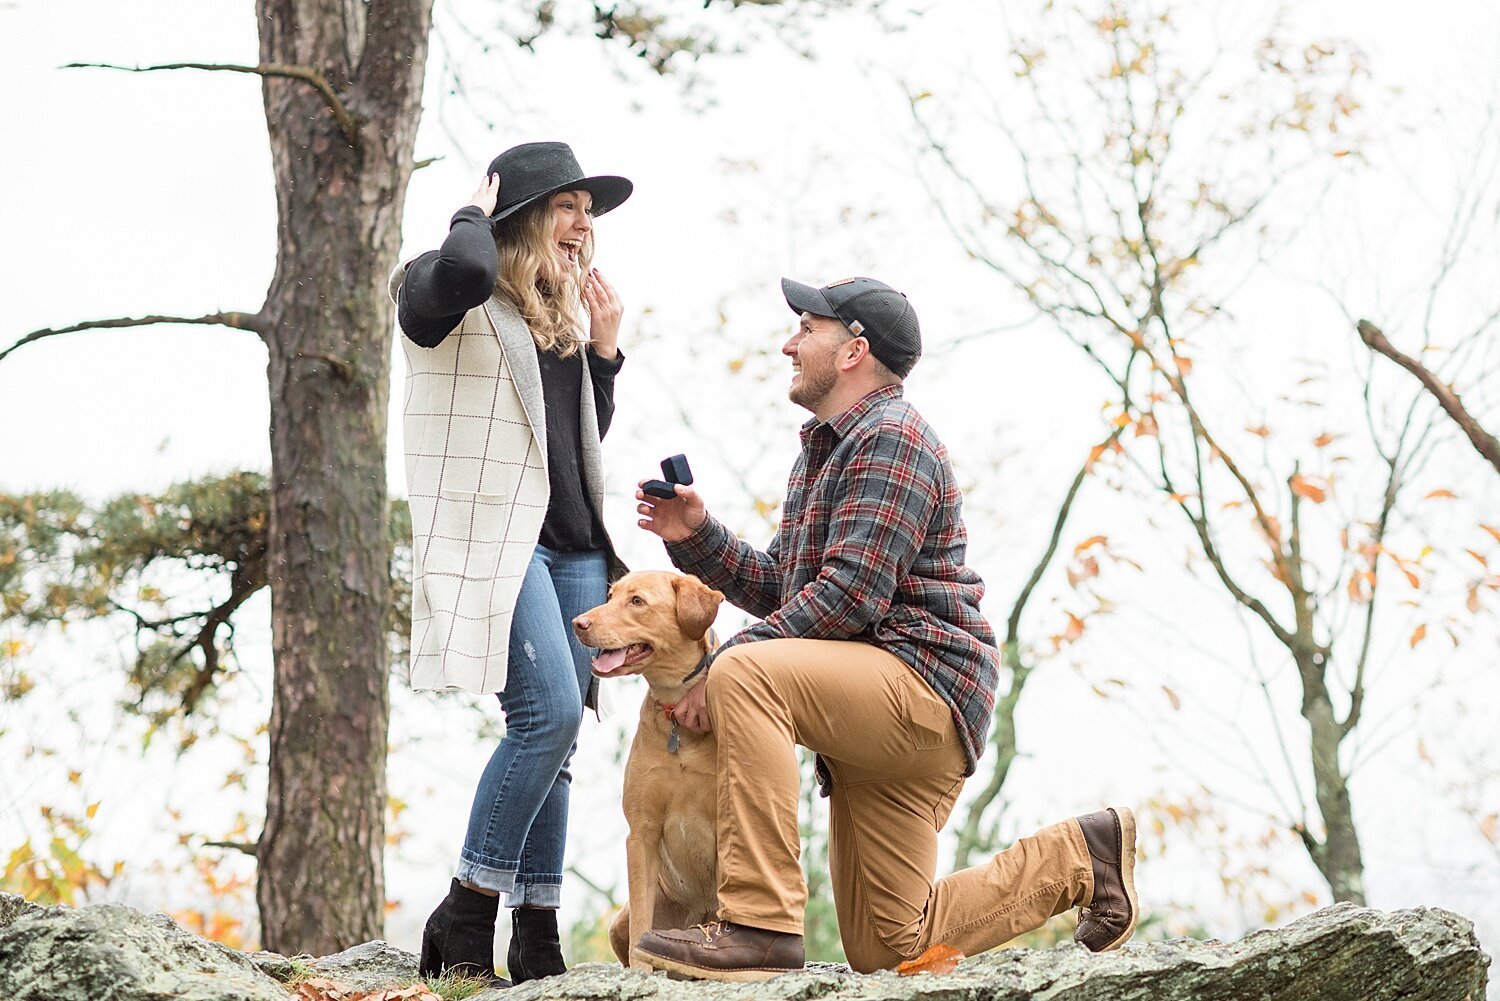 Pinnacle Overlook Holtwood PA Surprise Proposal Photography_8728.jpg